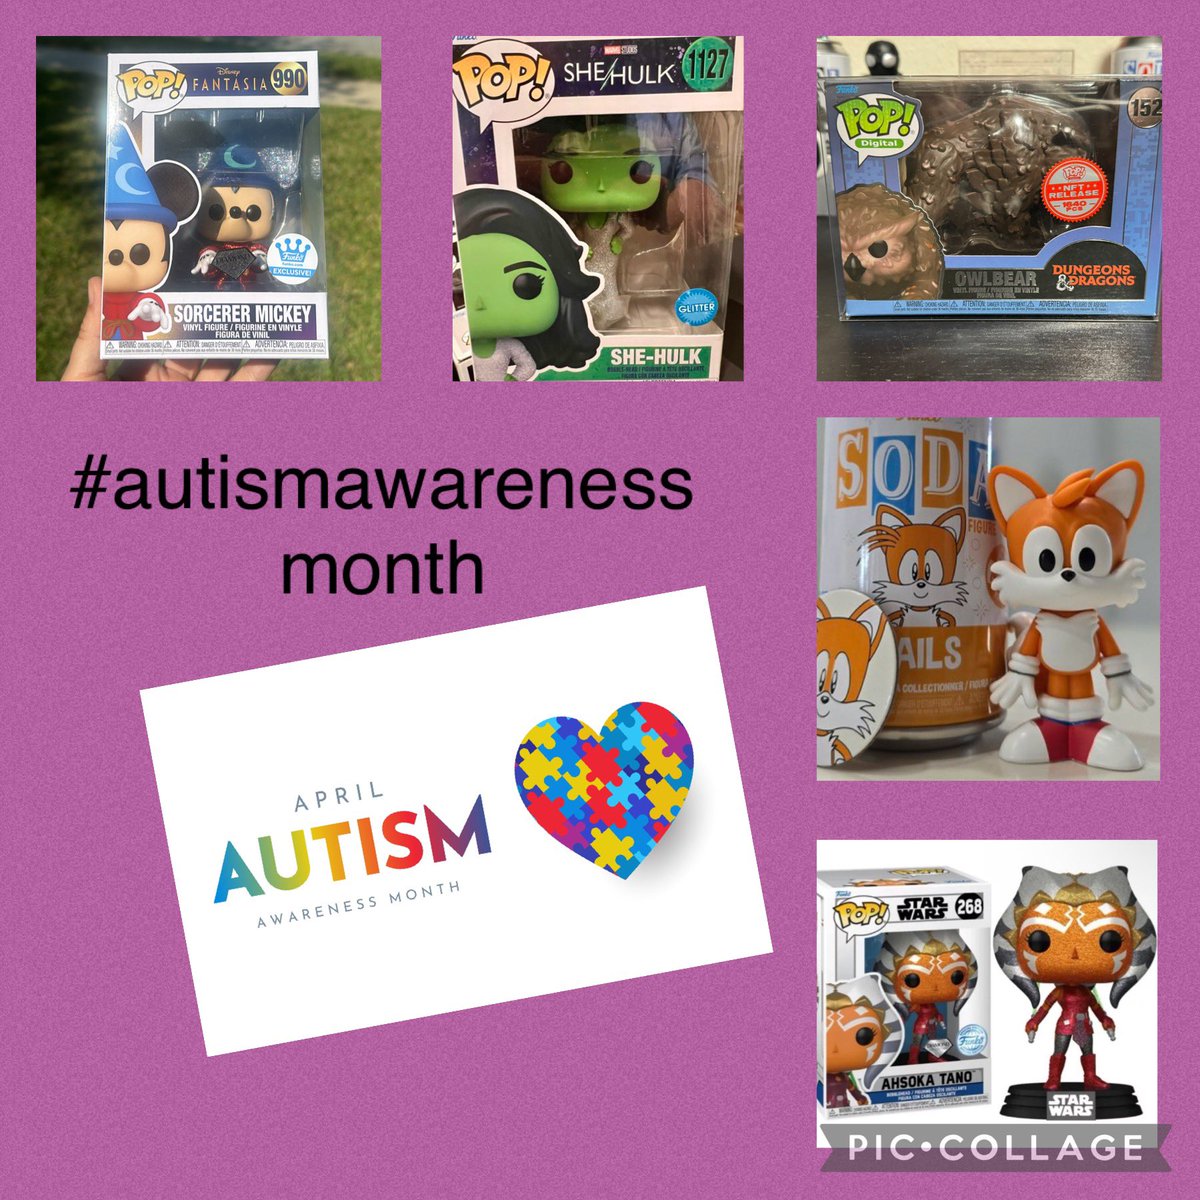 #giveaway #AutismAwarenessMonth my daughter,Taria she have lvl 1 ASD , and April birthstone is diamond 💎 1) PIC FUNKO with AUTISM ICON 2)follow/tag me and @Taria10Stars 3) retweet !! deadline April 24 thanks #funkofamily @DarthFreddySE @gj3342 @Hellrais3r13 @Topetahpbpn 🤟🏼